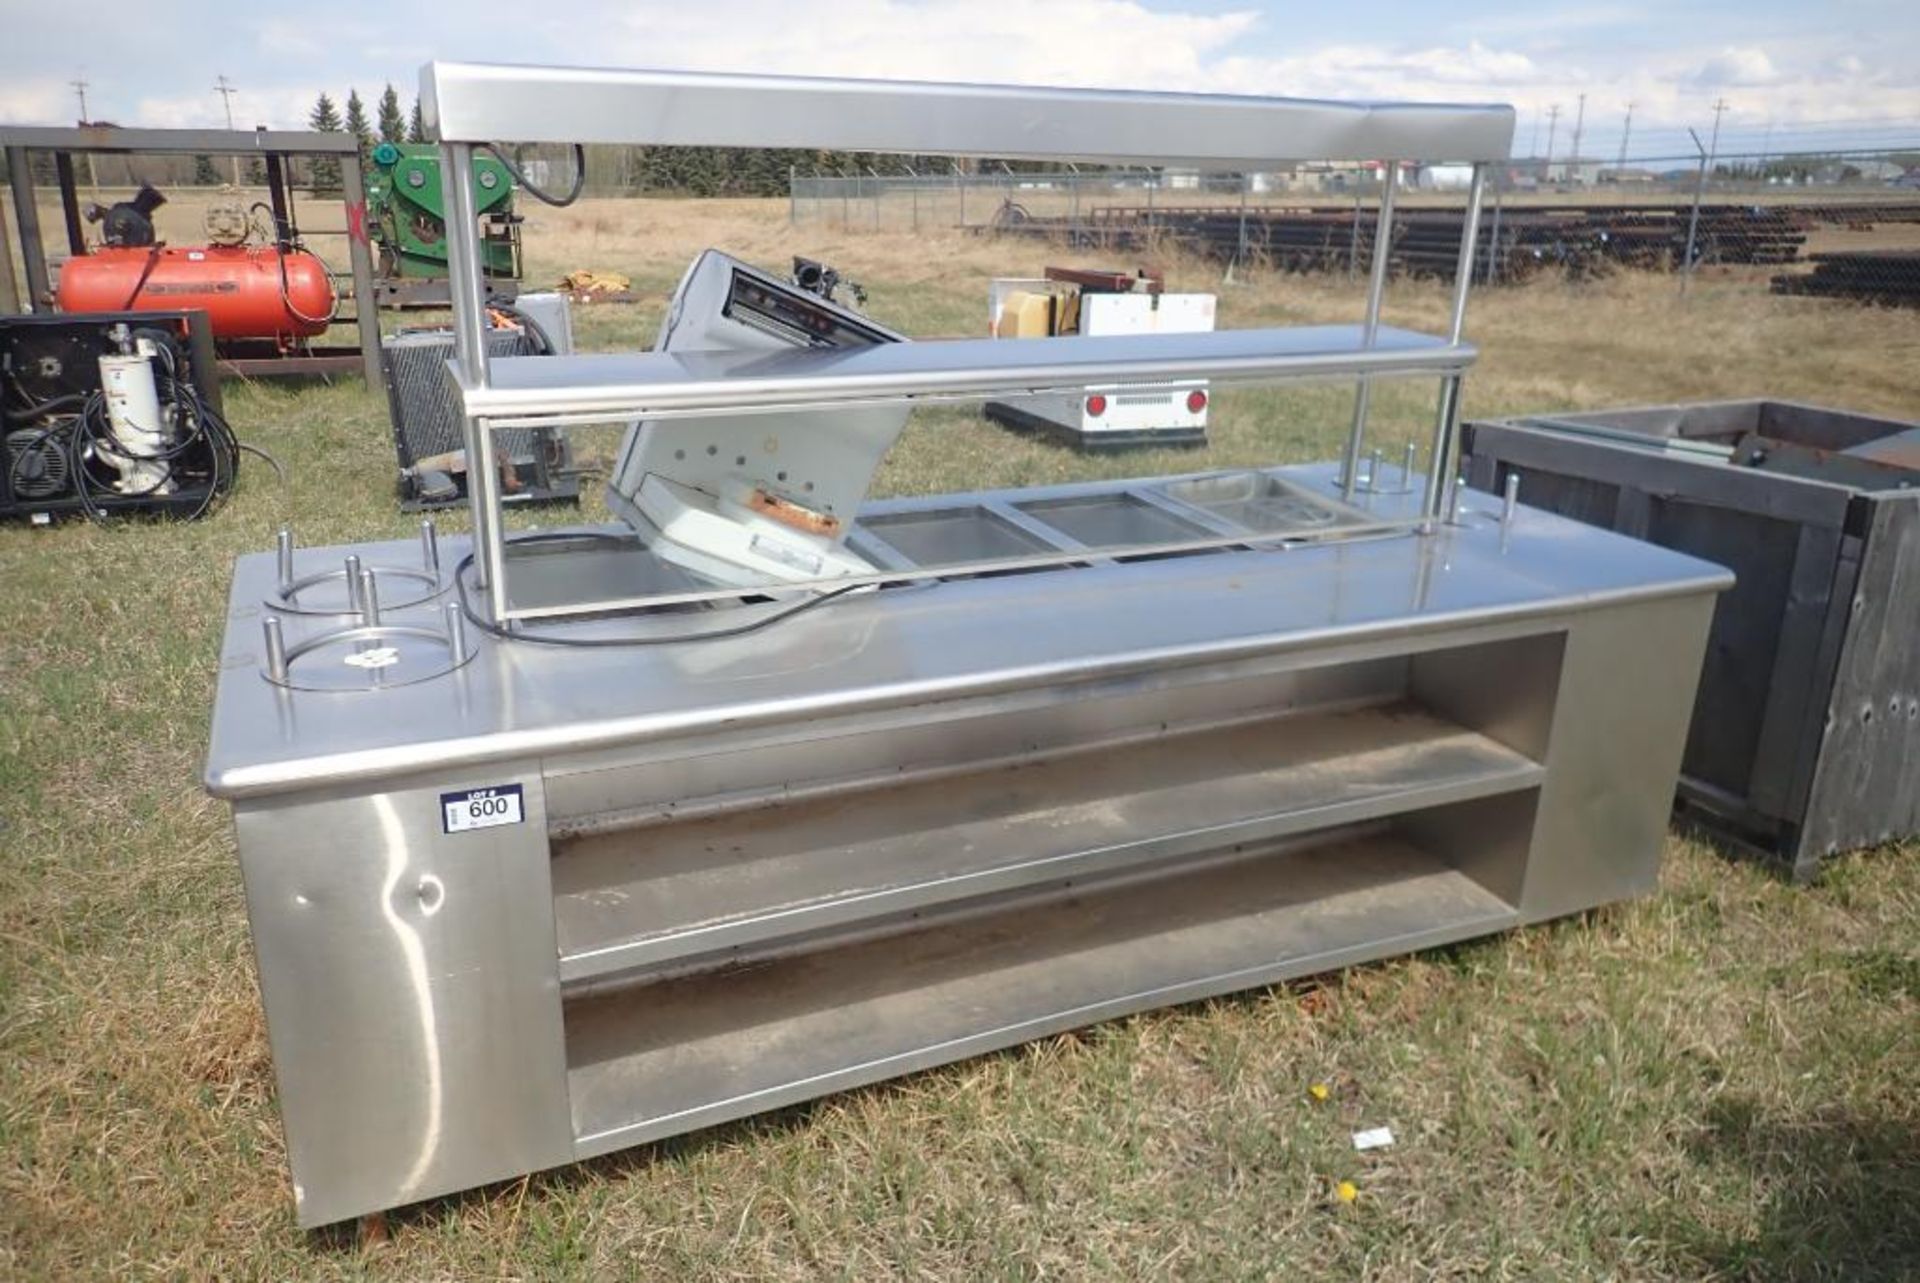 Lot of Stainless Steel 102"x42" Steam Table, Toledo Scale and Stainless Steel Hood.